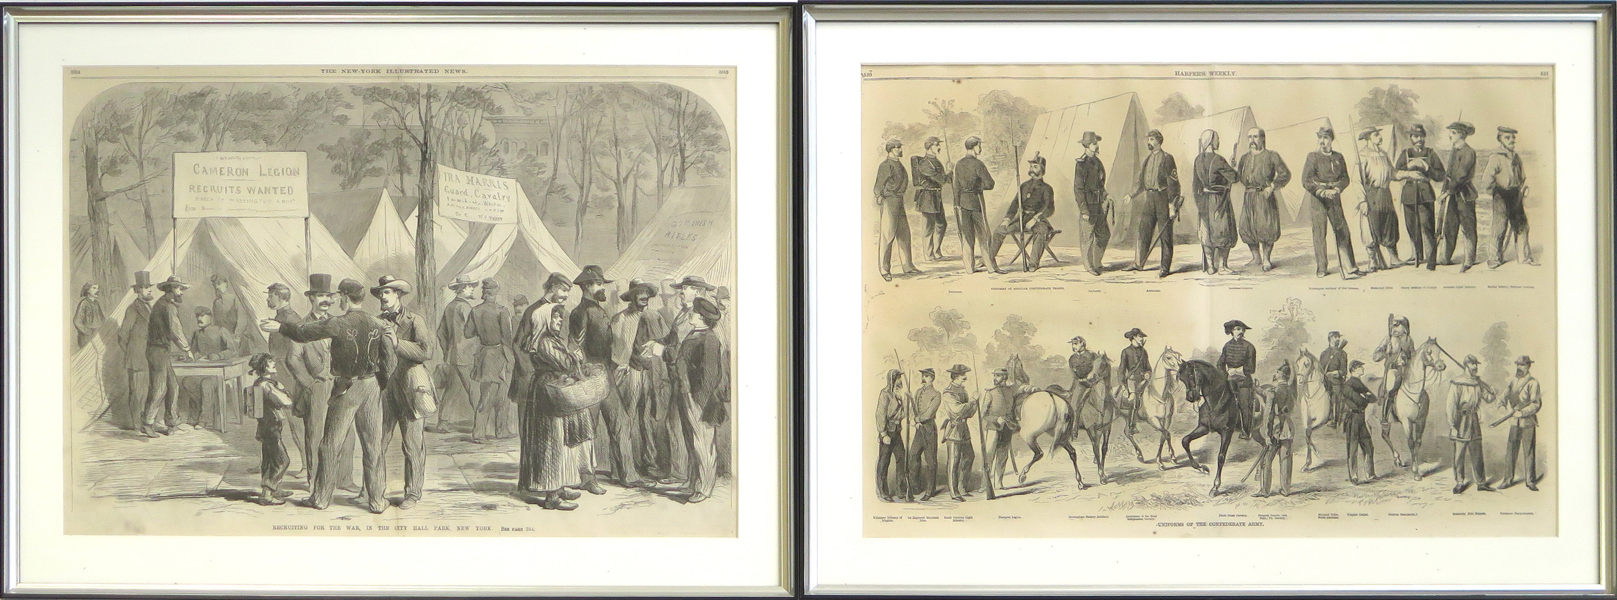 Litografier, 2 st: Amerikanska Inbördeskriget; "Uniforms of the Confederate Army" ur  "Harper's weekly" 17/8 1861 samt "Recruiting for the war, in the City Hall Park, New York" _29235a_lg.jpeg